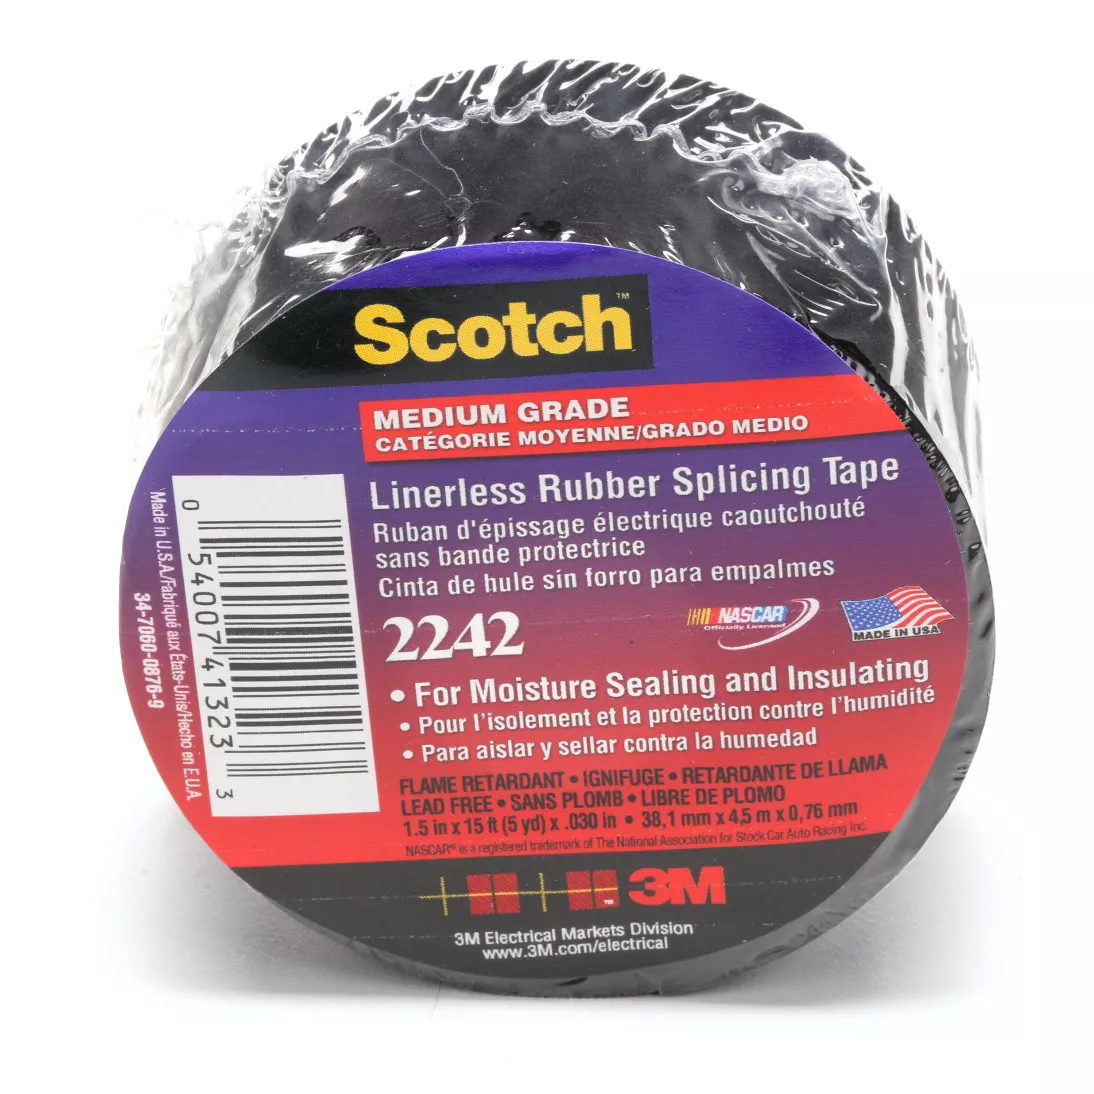 3M™ Linerless Electrical Rubber Tape 2242, 1-1/2 in x 15 ft, 1 in core,
Black, 1 roll/carton, 12 rolls/case